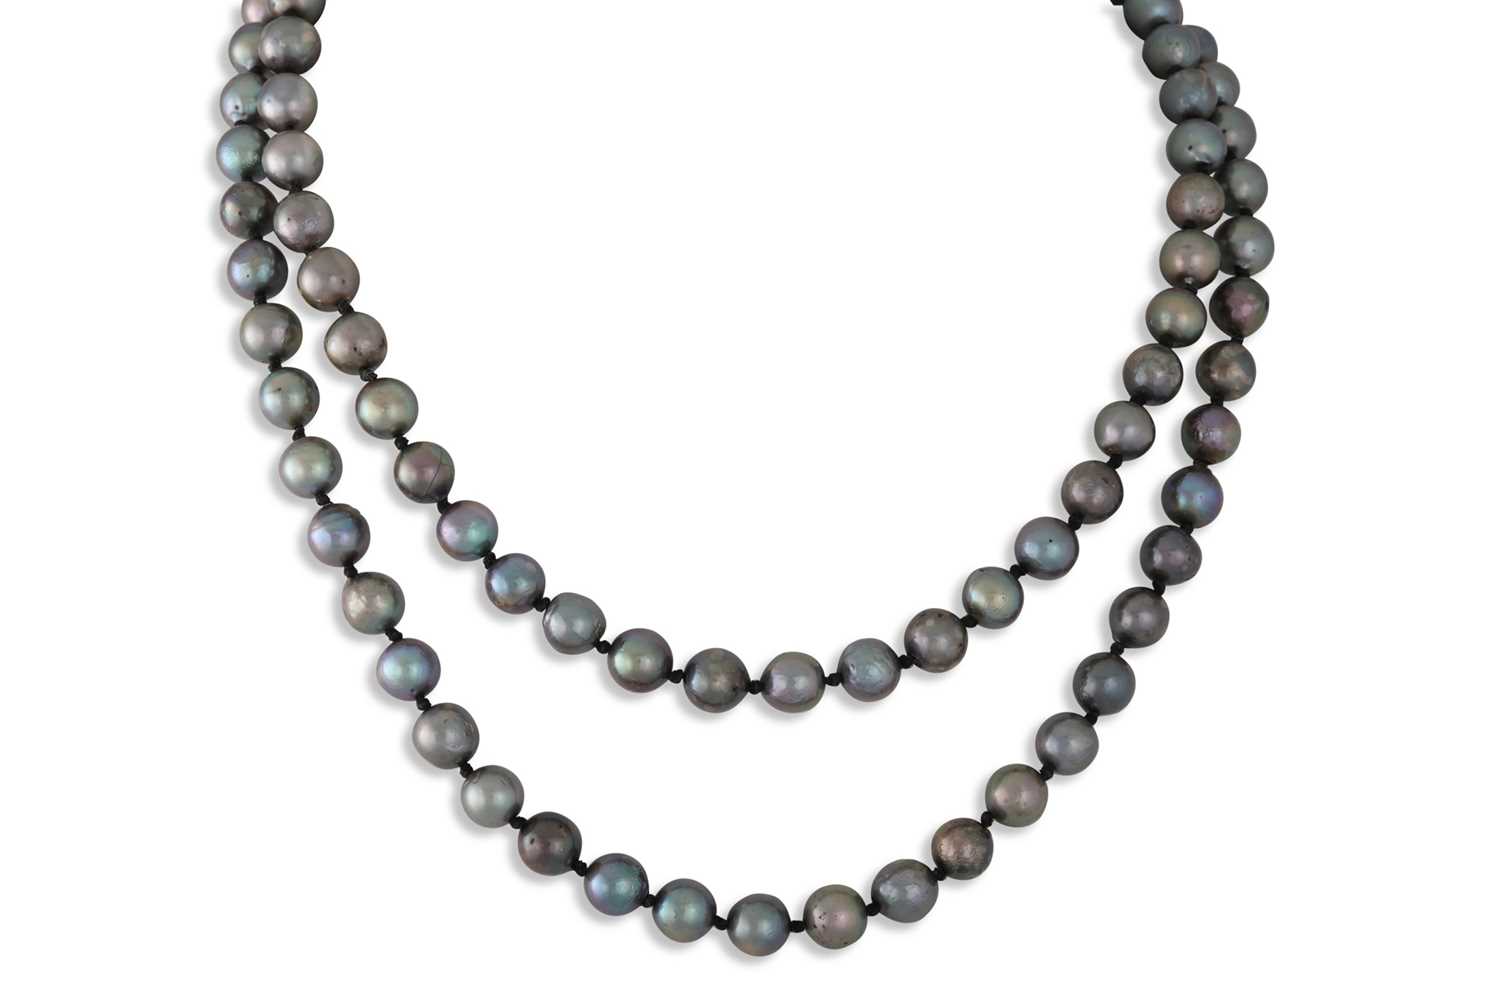 Lot 88 - A BLACK CULTURED PEARL NECKLACE, 30" long